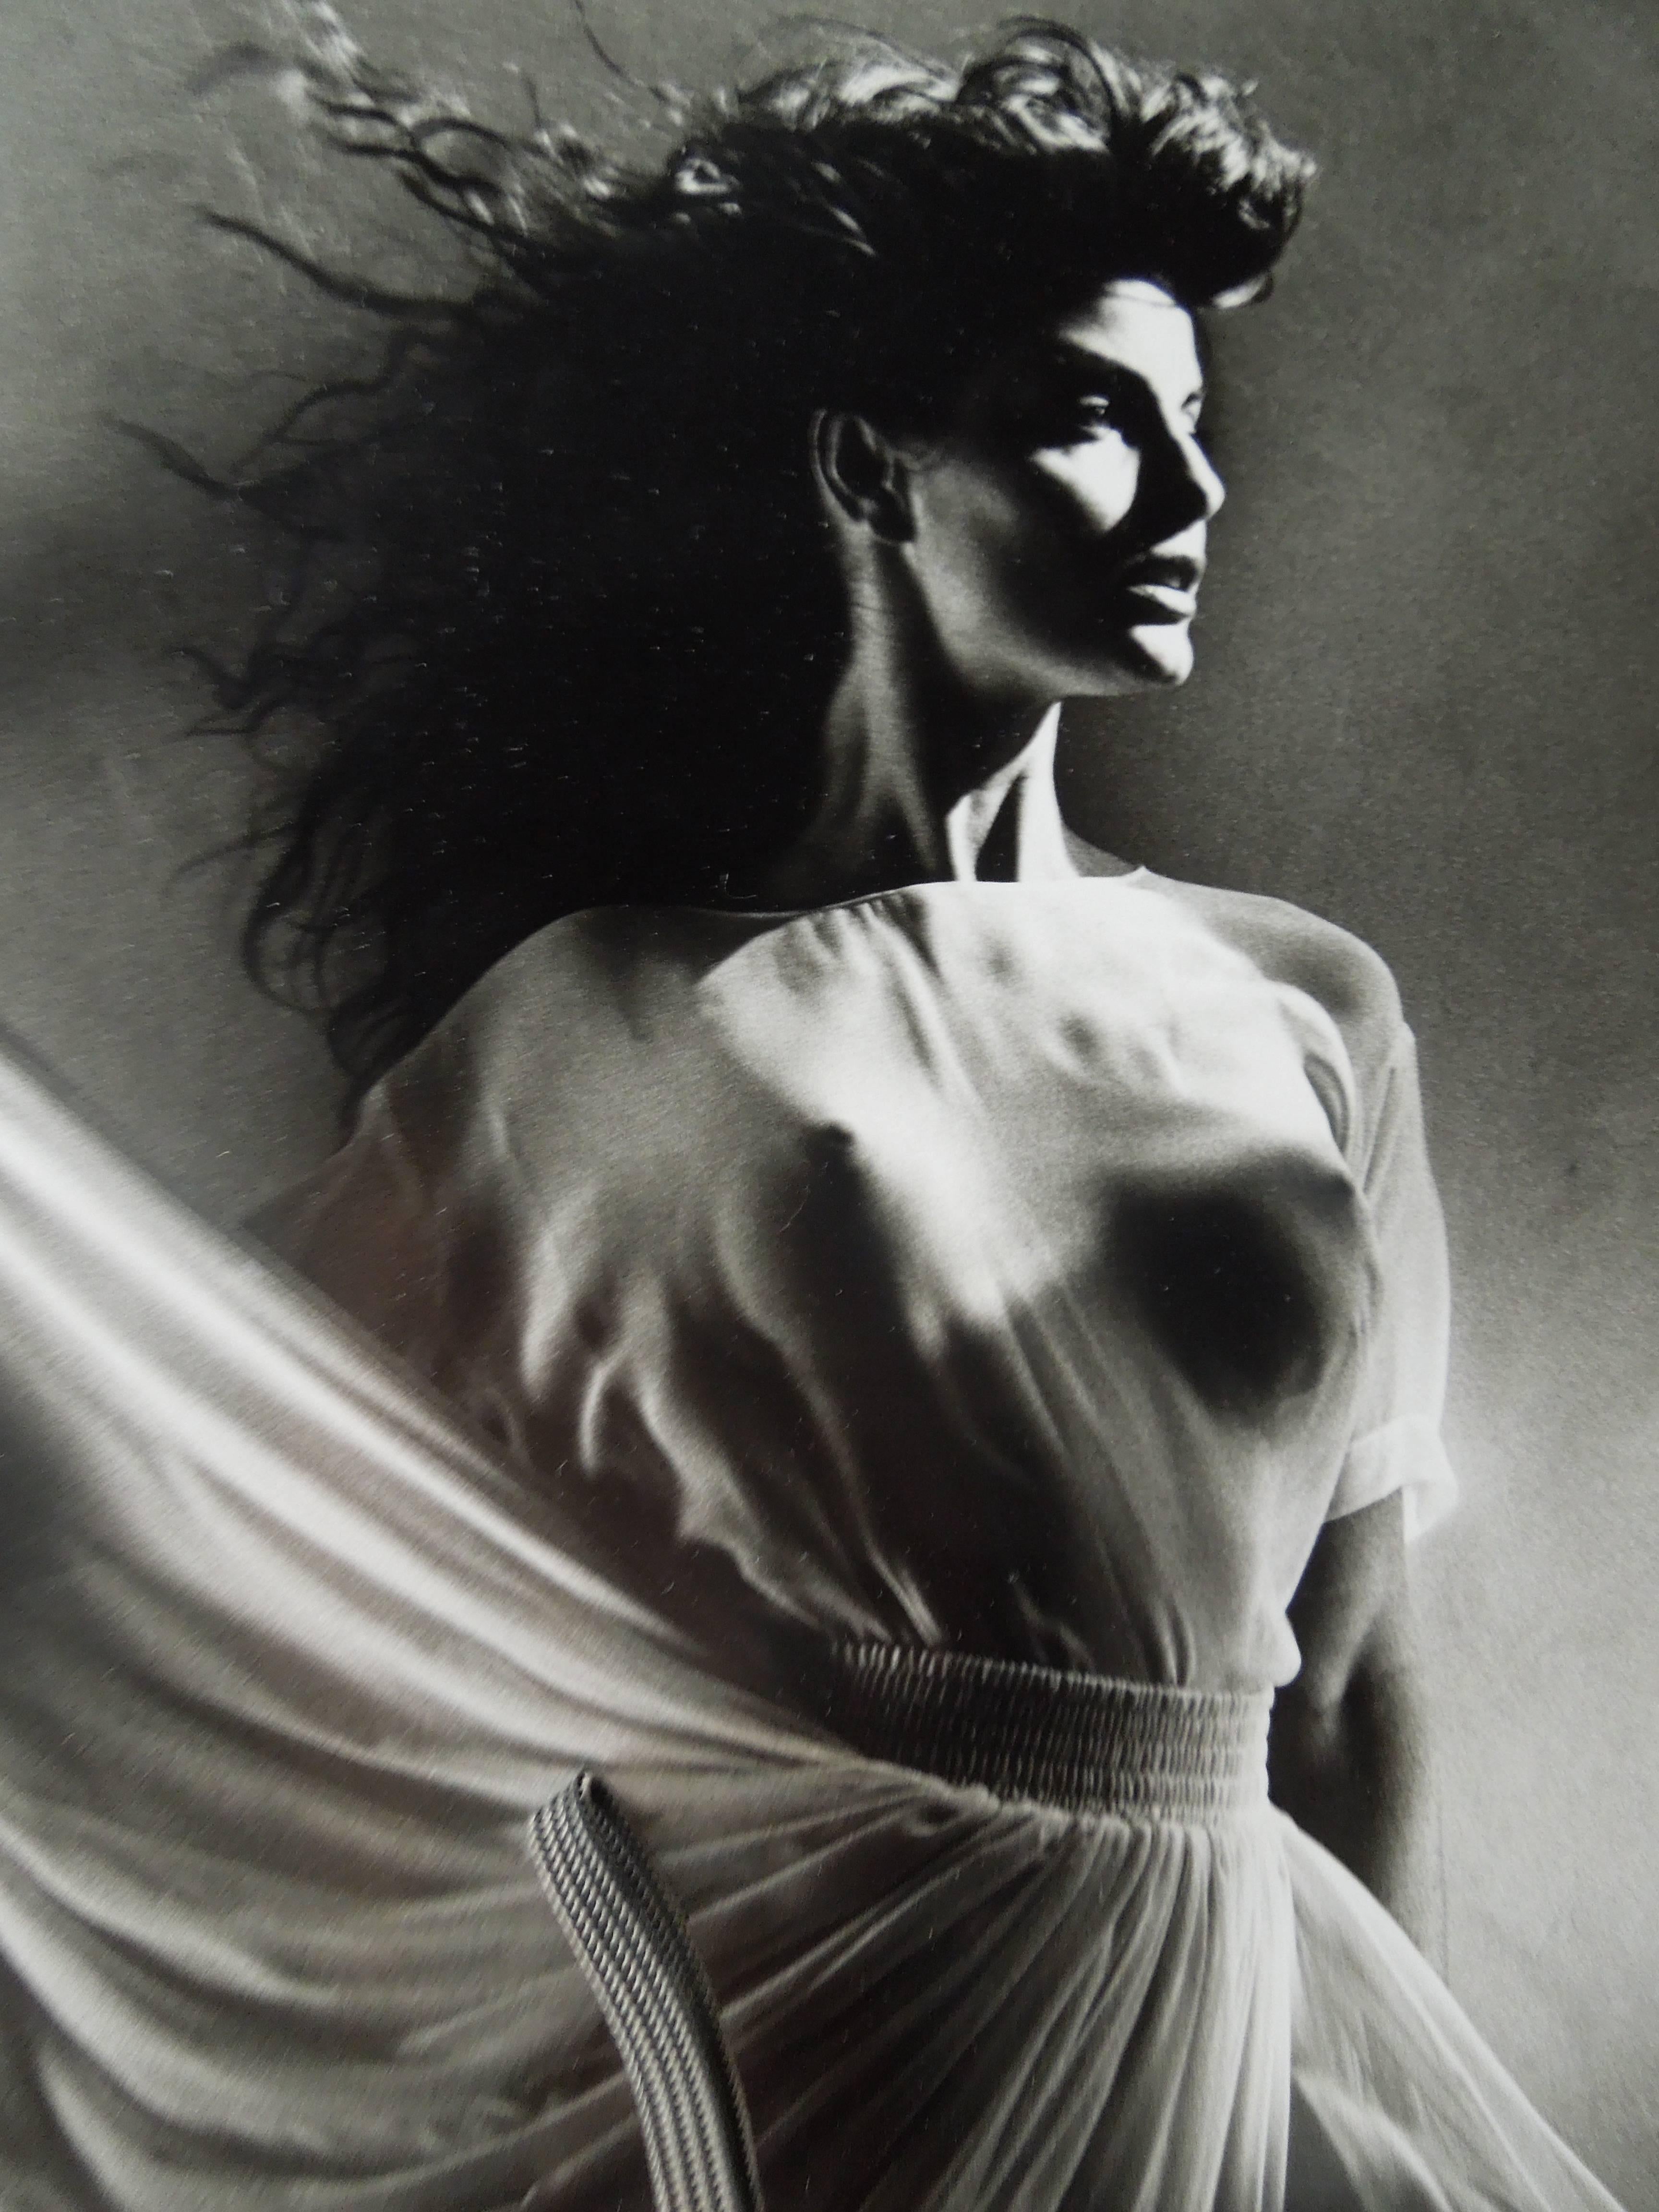 Taken in 1988 in Los Angeles, CA at the Greg Gorman Studio is this silver gelatin photograph (printed the old fashioned way by hand) Photo white matte. Artist proof #2. Signed by Greg Gorman on verso. Original black lacquer frame from 1988. large